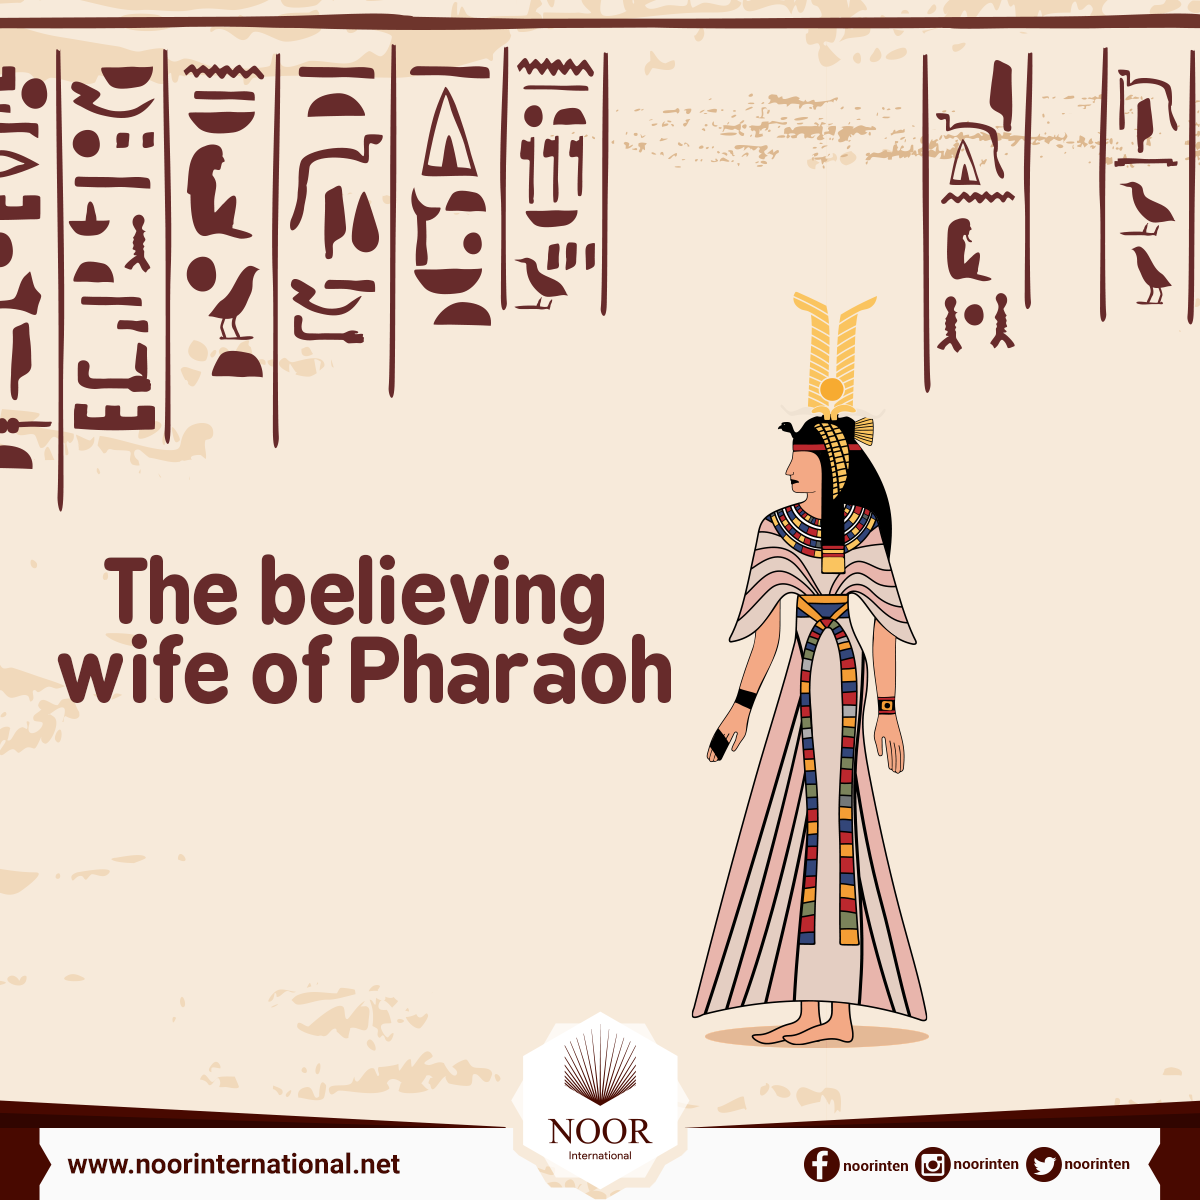 The believing wife of Pharaoh